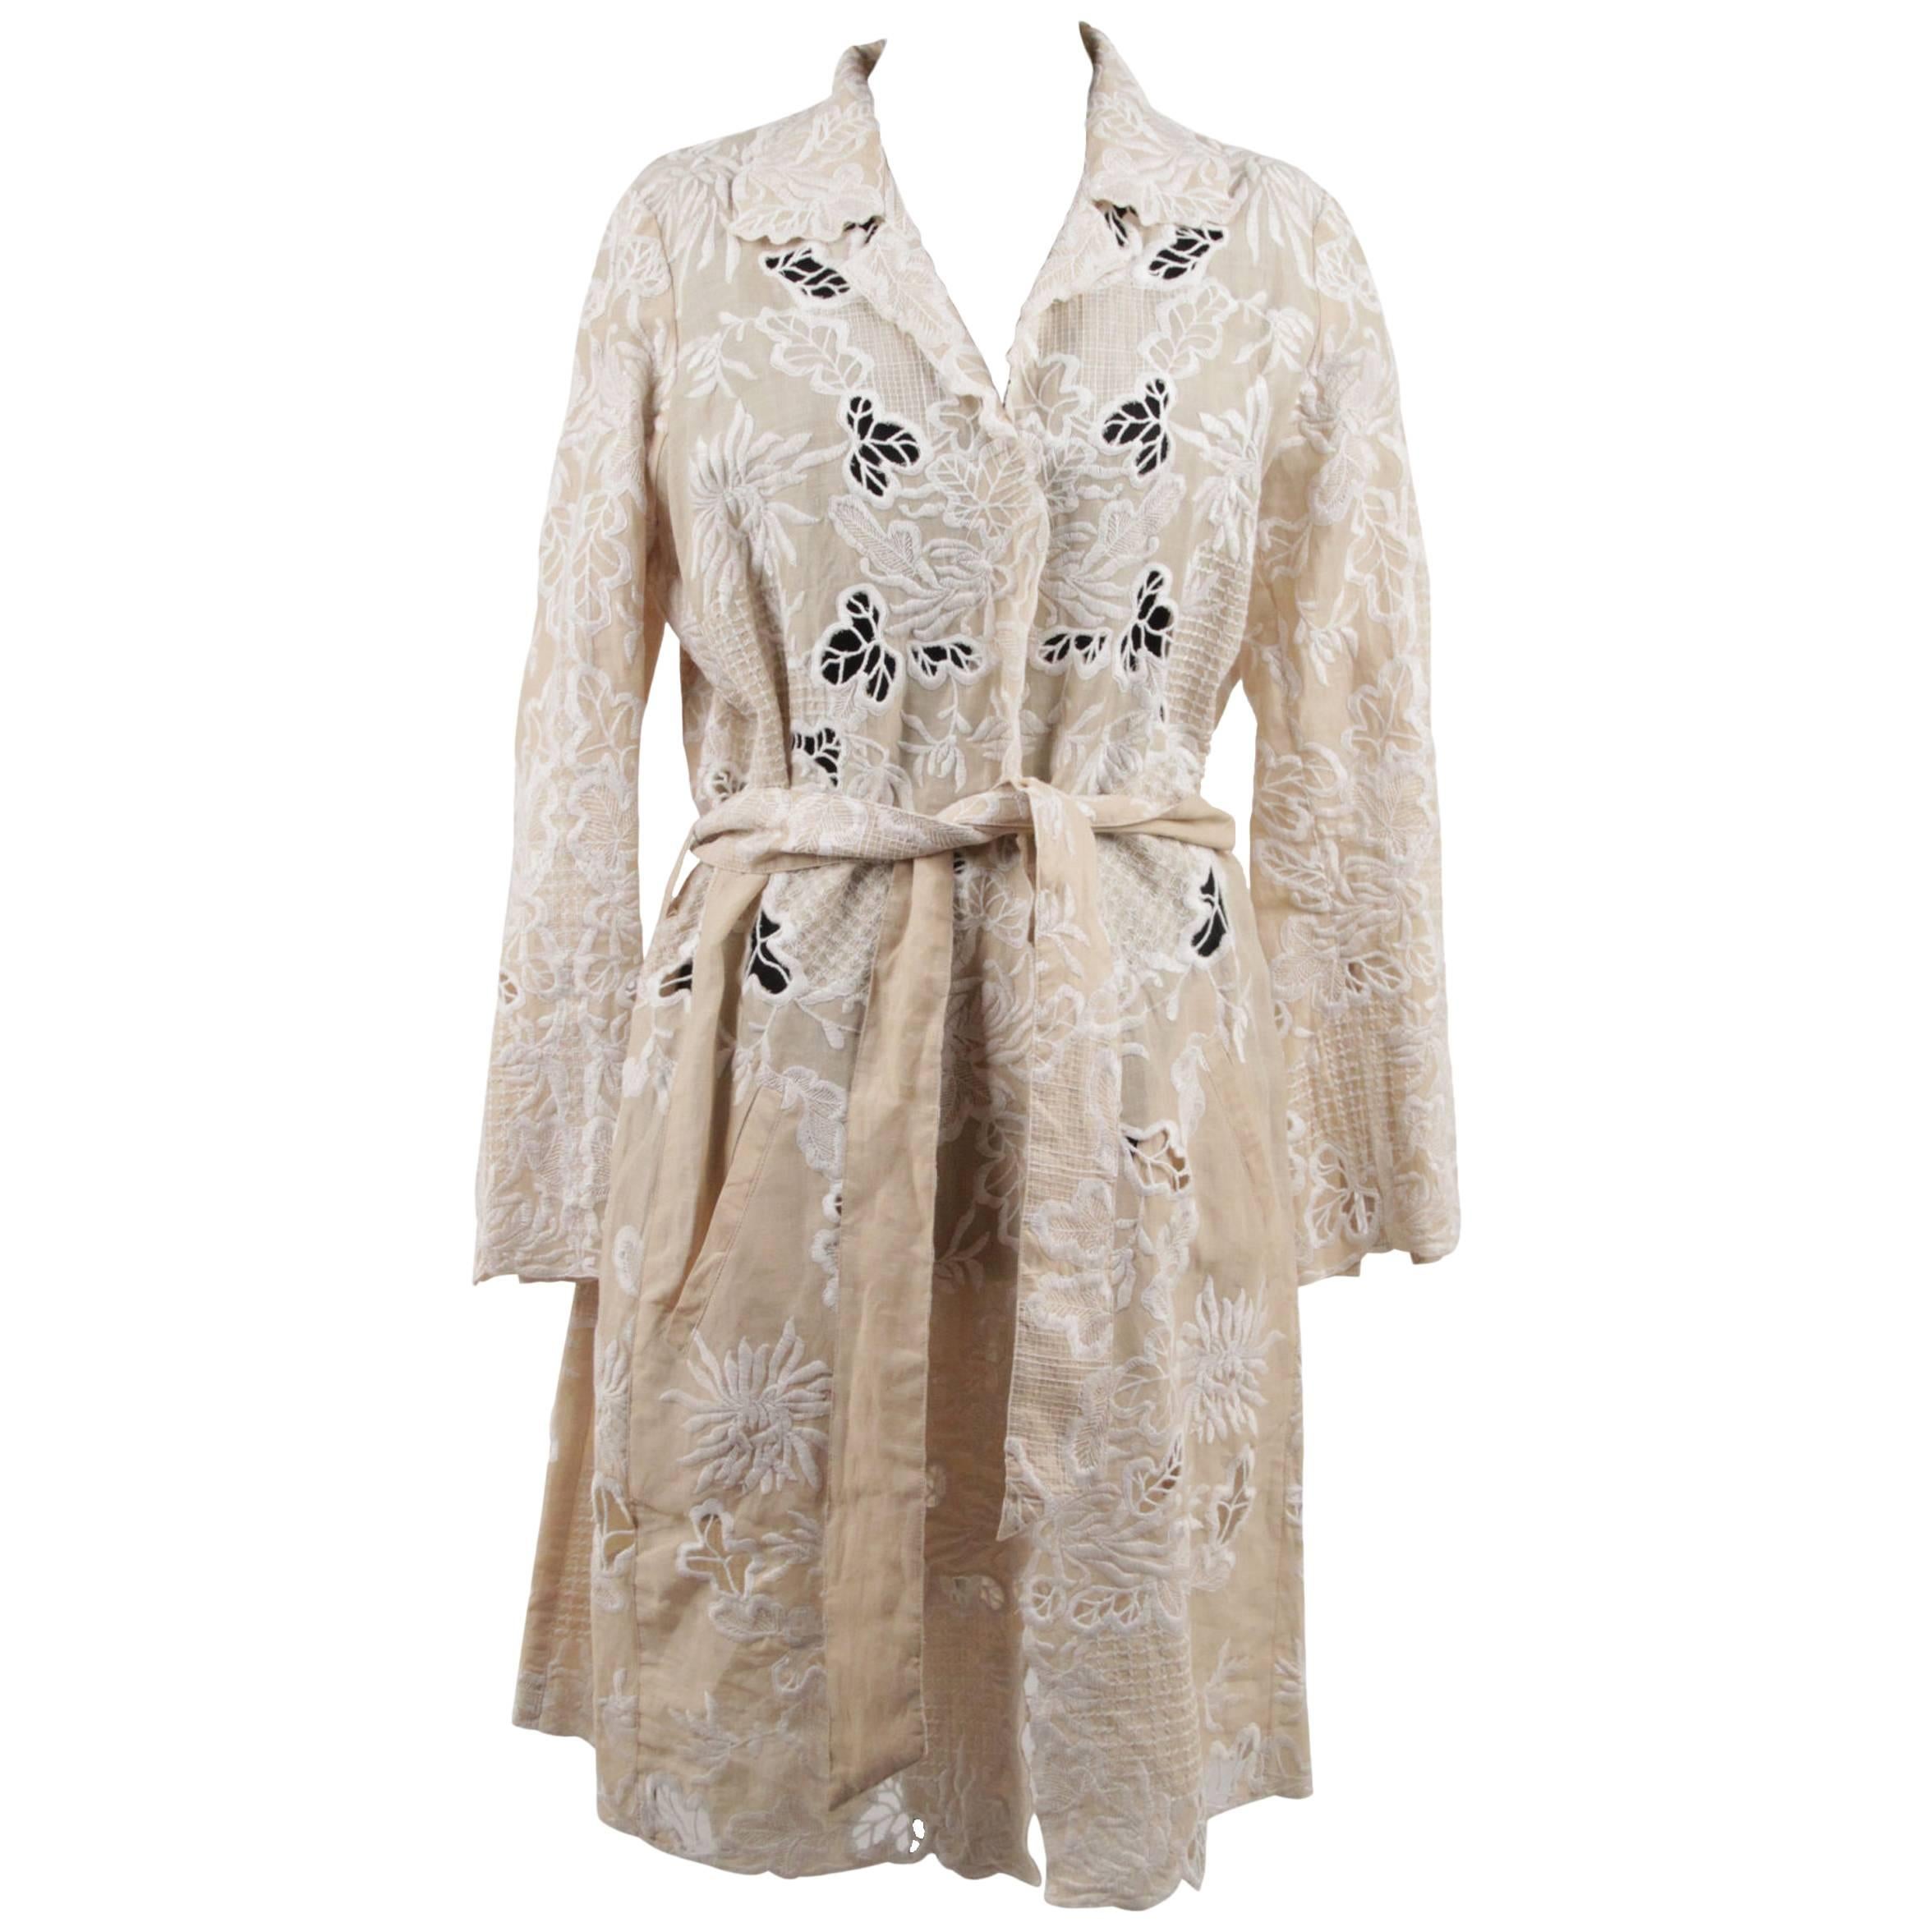 SCERVINO STREET Beige & White EMBROIDERIE Floral TRENCH COAT Size 44